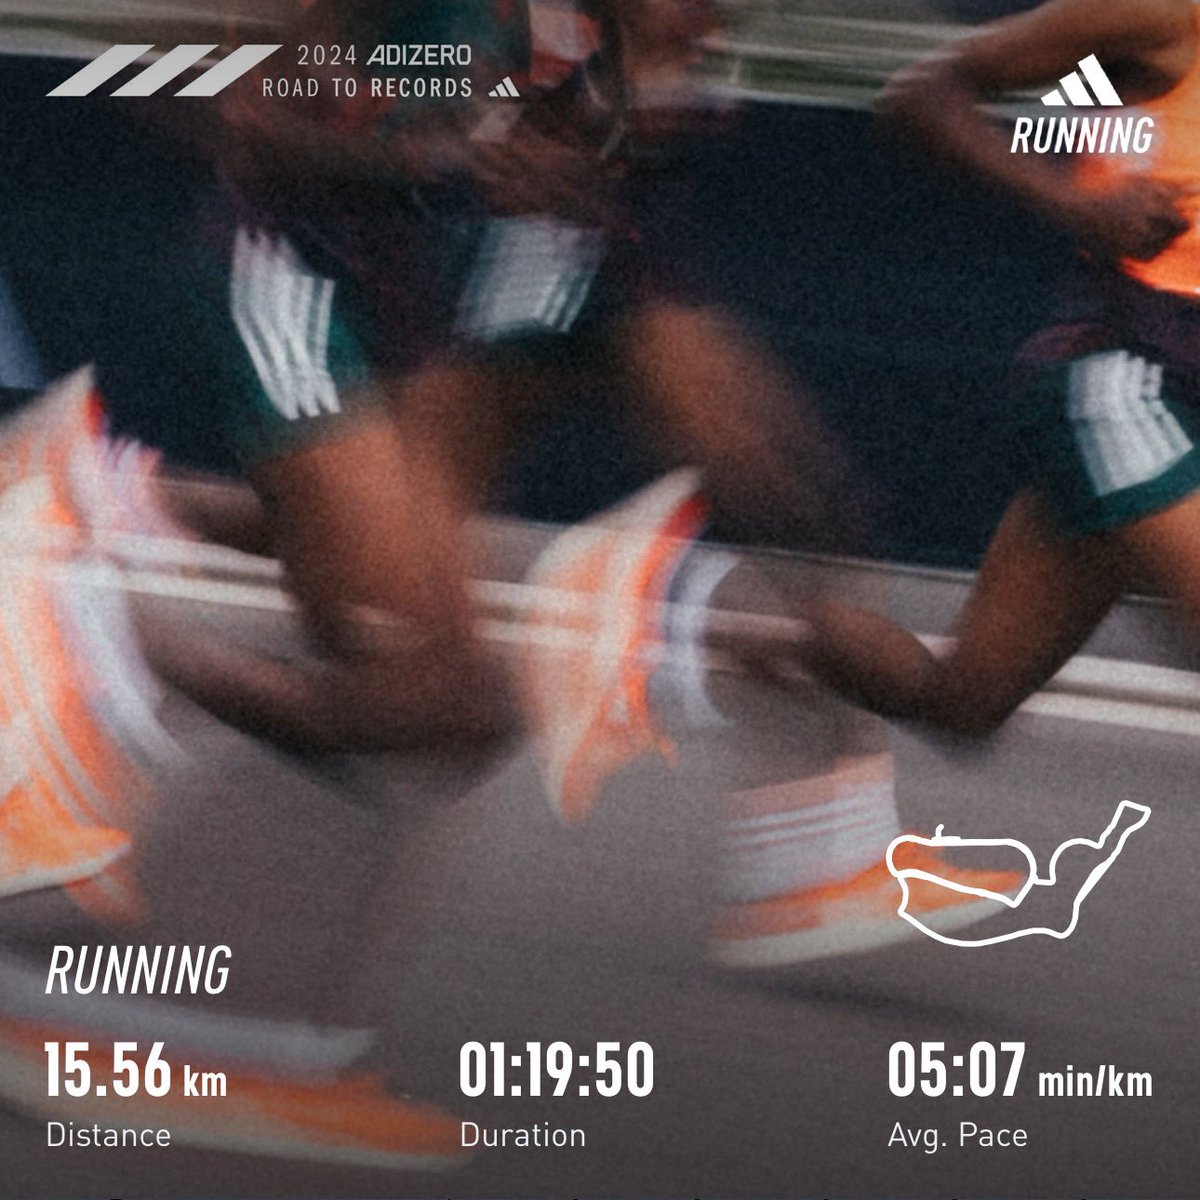 It's up to us to decide the kind of life we want to live. Nobody else should have power over us in deciding what to do with that life.
#RunningWithSoleA
#runningwithtumisole
#runwitharthurk
#nikerunning
#adidasruntastic
#runaddicted 
#halfmarathon
#IPaintedMyRun